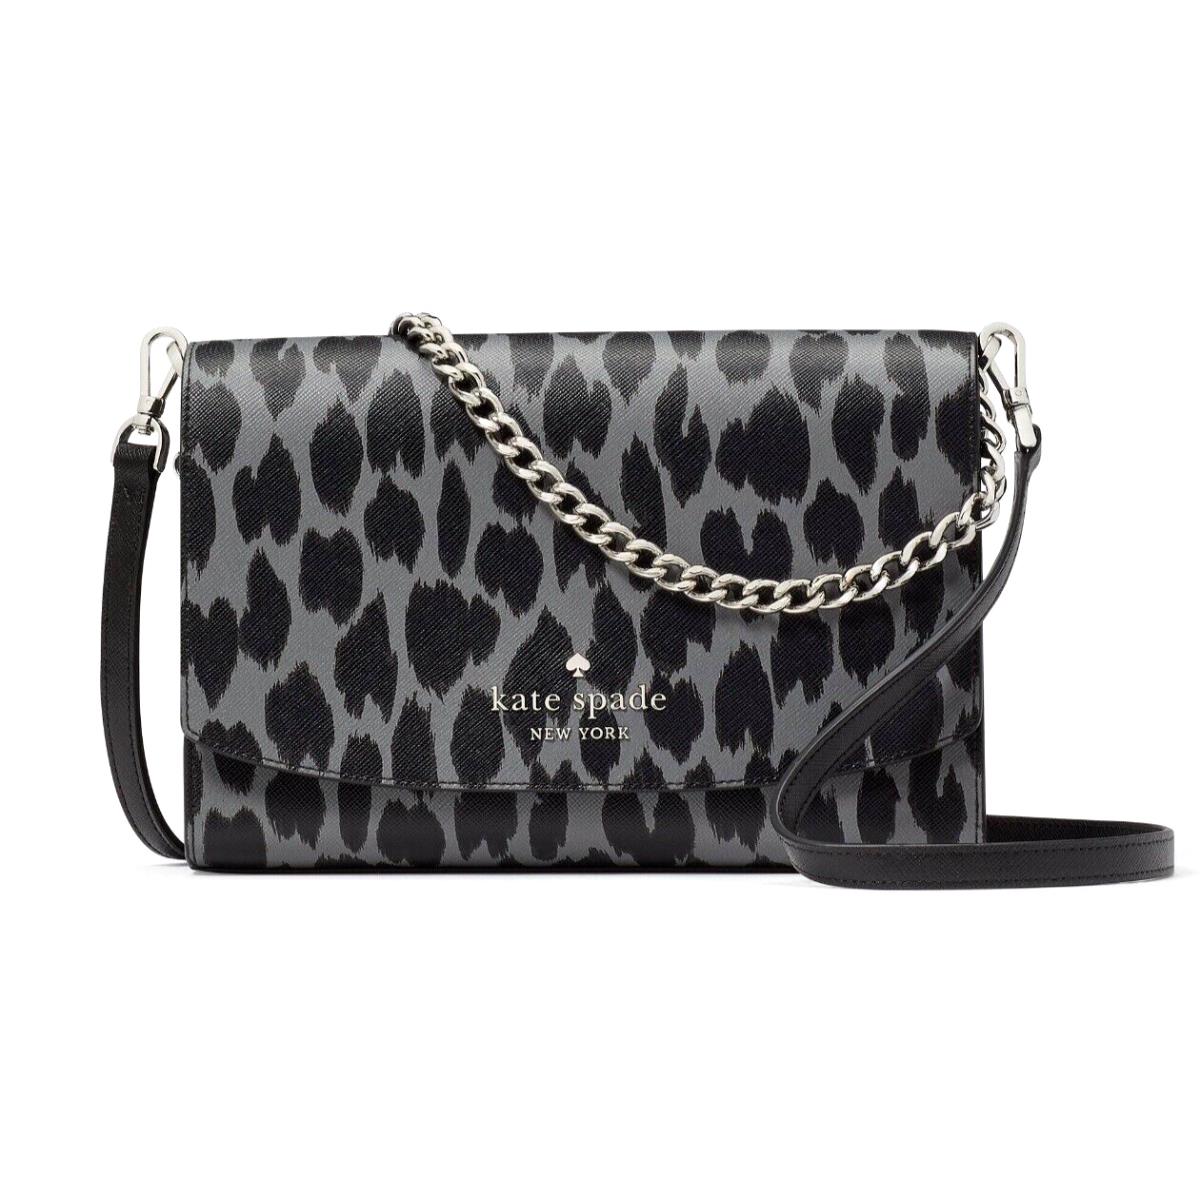 New Kate Spade Carson Convertible Crossbody Saffiano Spotted Animal / Dust Bag